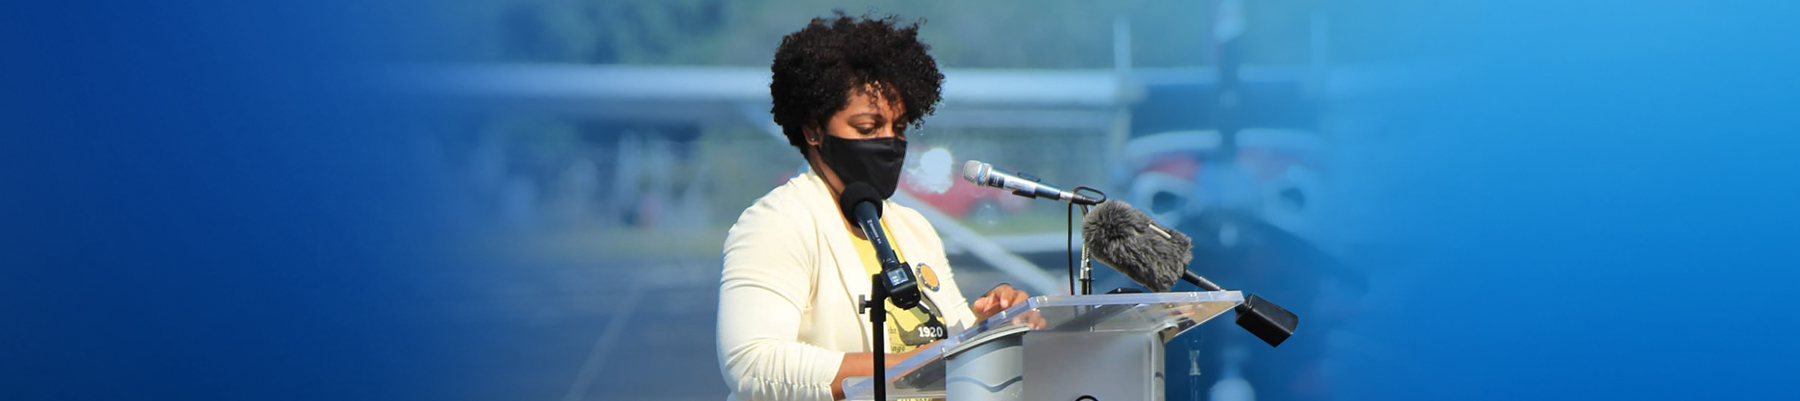 Image of Aurelina wearing a facemask and speaking into a microphone